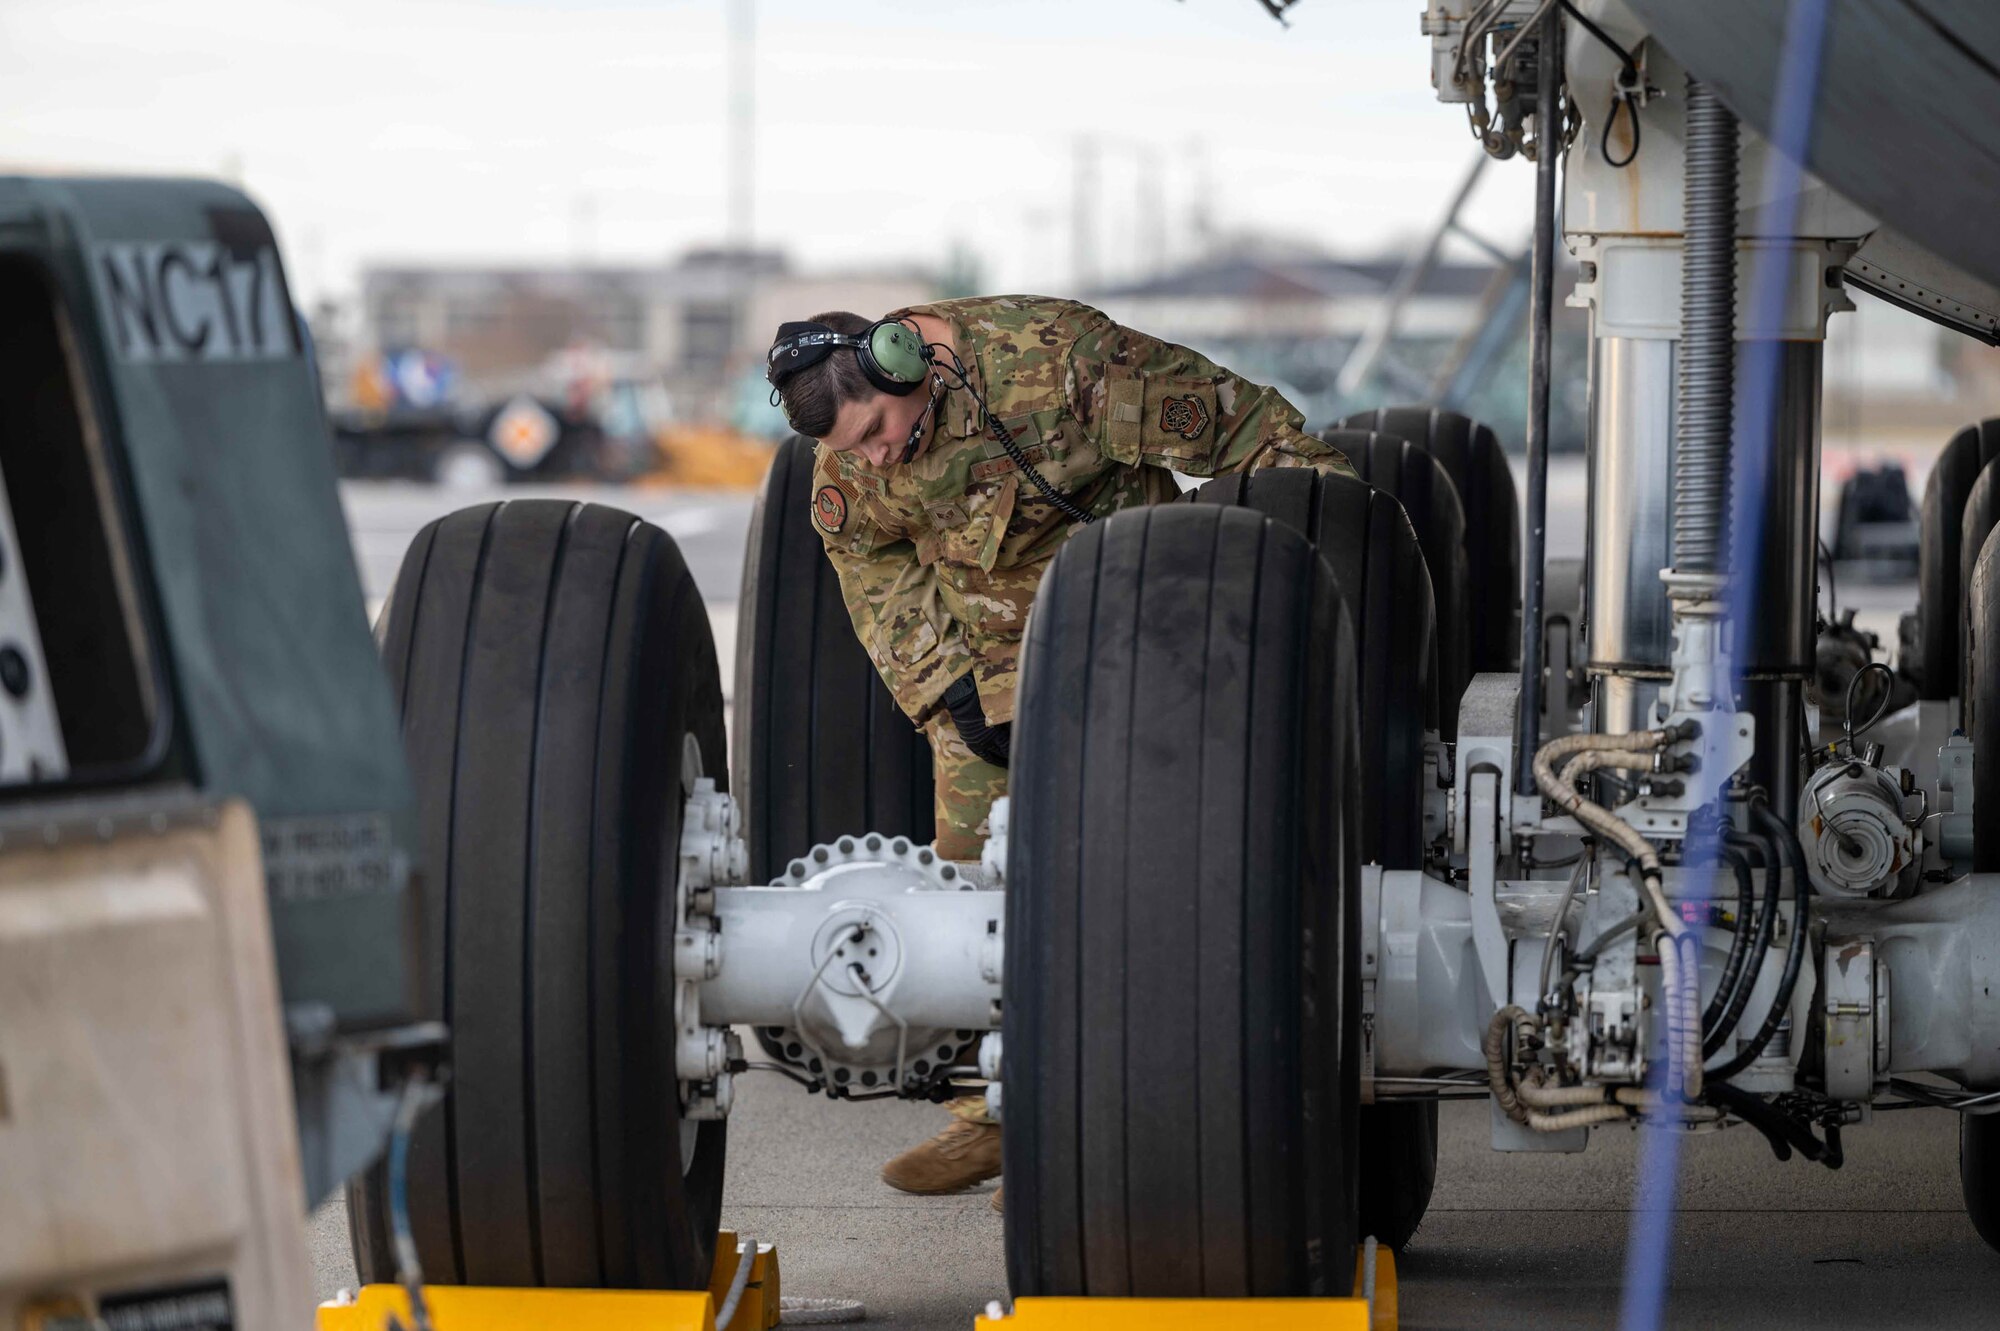 Staff Sgt. Caleb Osborne, 9th Airlift Squadron flight engineer, checks landing gear tires on a C-5M Super Galaxy before takeoff to Joint Base McGuire-Dix-Lakehurst, New Jersey, at Dover Air Force Base, Delaware, Dec. 17, 2021. The 9th AS delivered supplies to aid the Joint Base Pearl Harbor-Hickam (JBPHH), Hawaii water quality recovery, a joint U.S. military initiative working closely with the State of Hawaii, Department of Health, Honolulu Board of Water Supply, U.S. government and independent organizations to restore a safe water delivery system to JBPHH military housing communities through testing, treatment, and repair. For detailed information, including available resources and locations, and news, go to www.navy.mil/jointbasewater.      (U.S. Air Force photo by Senior Airman Faith Schaefer)